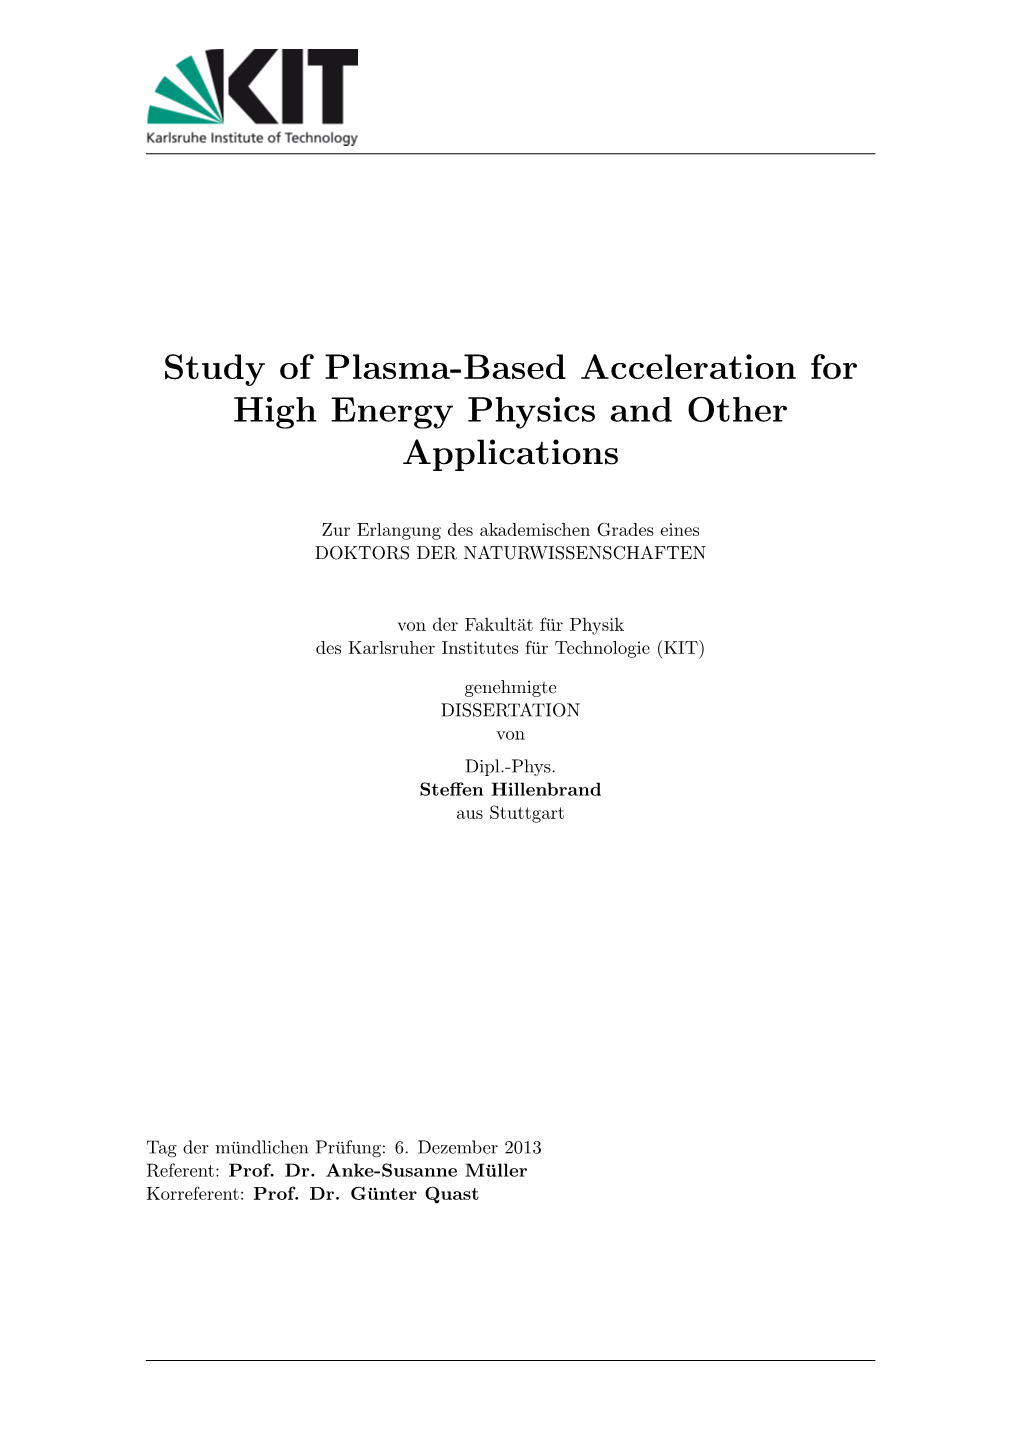 Study of Plasma-Based Acceleration for High Energy Physics and Other Applications